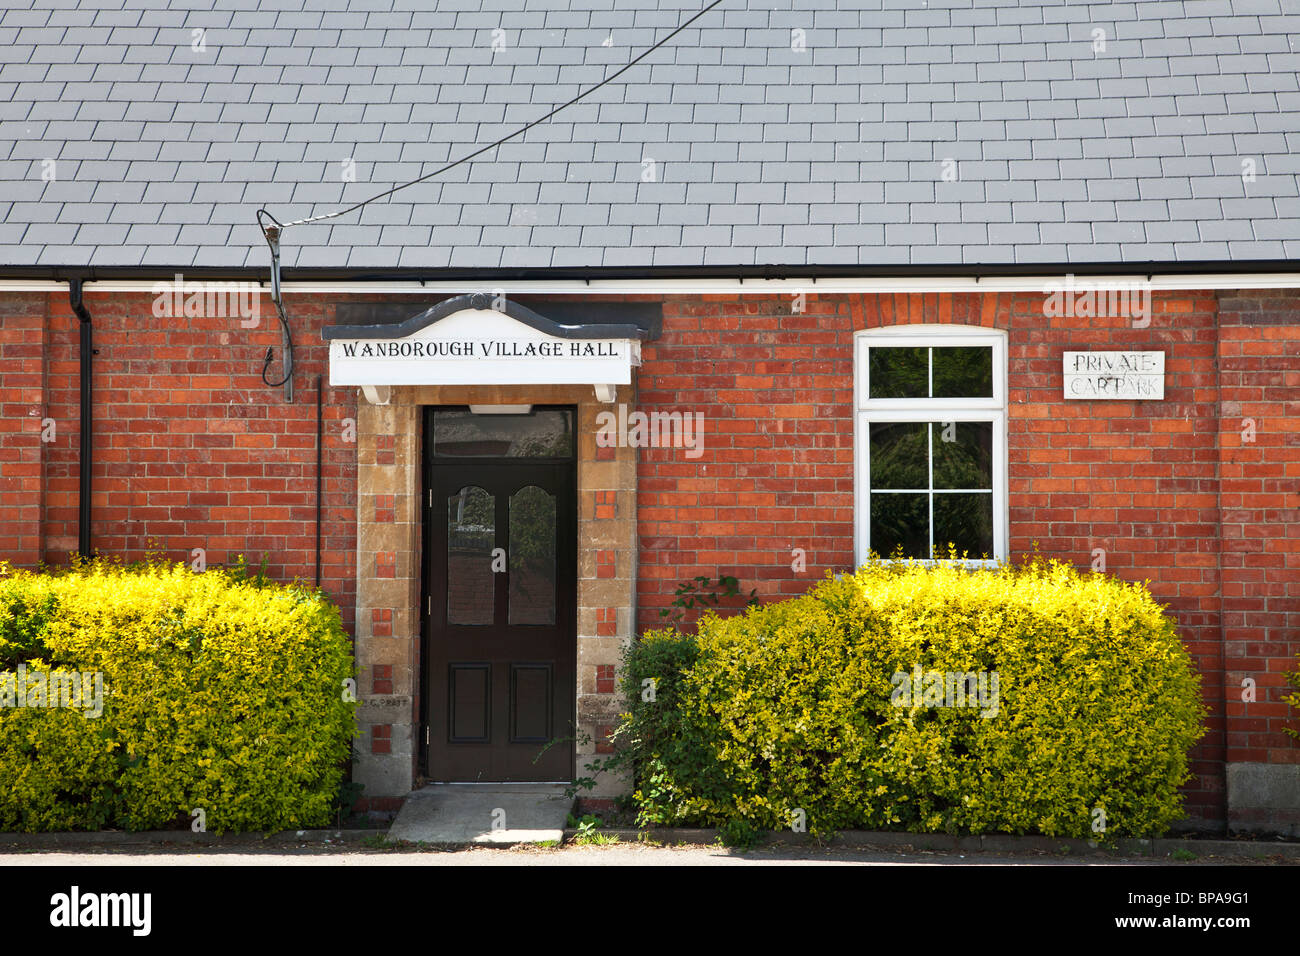 Typical English village or community hall in Wanborough, Wiltshire, England,UK Stock Photo